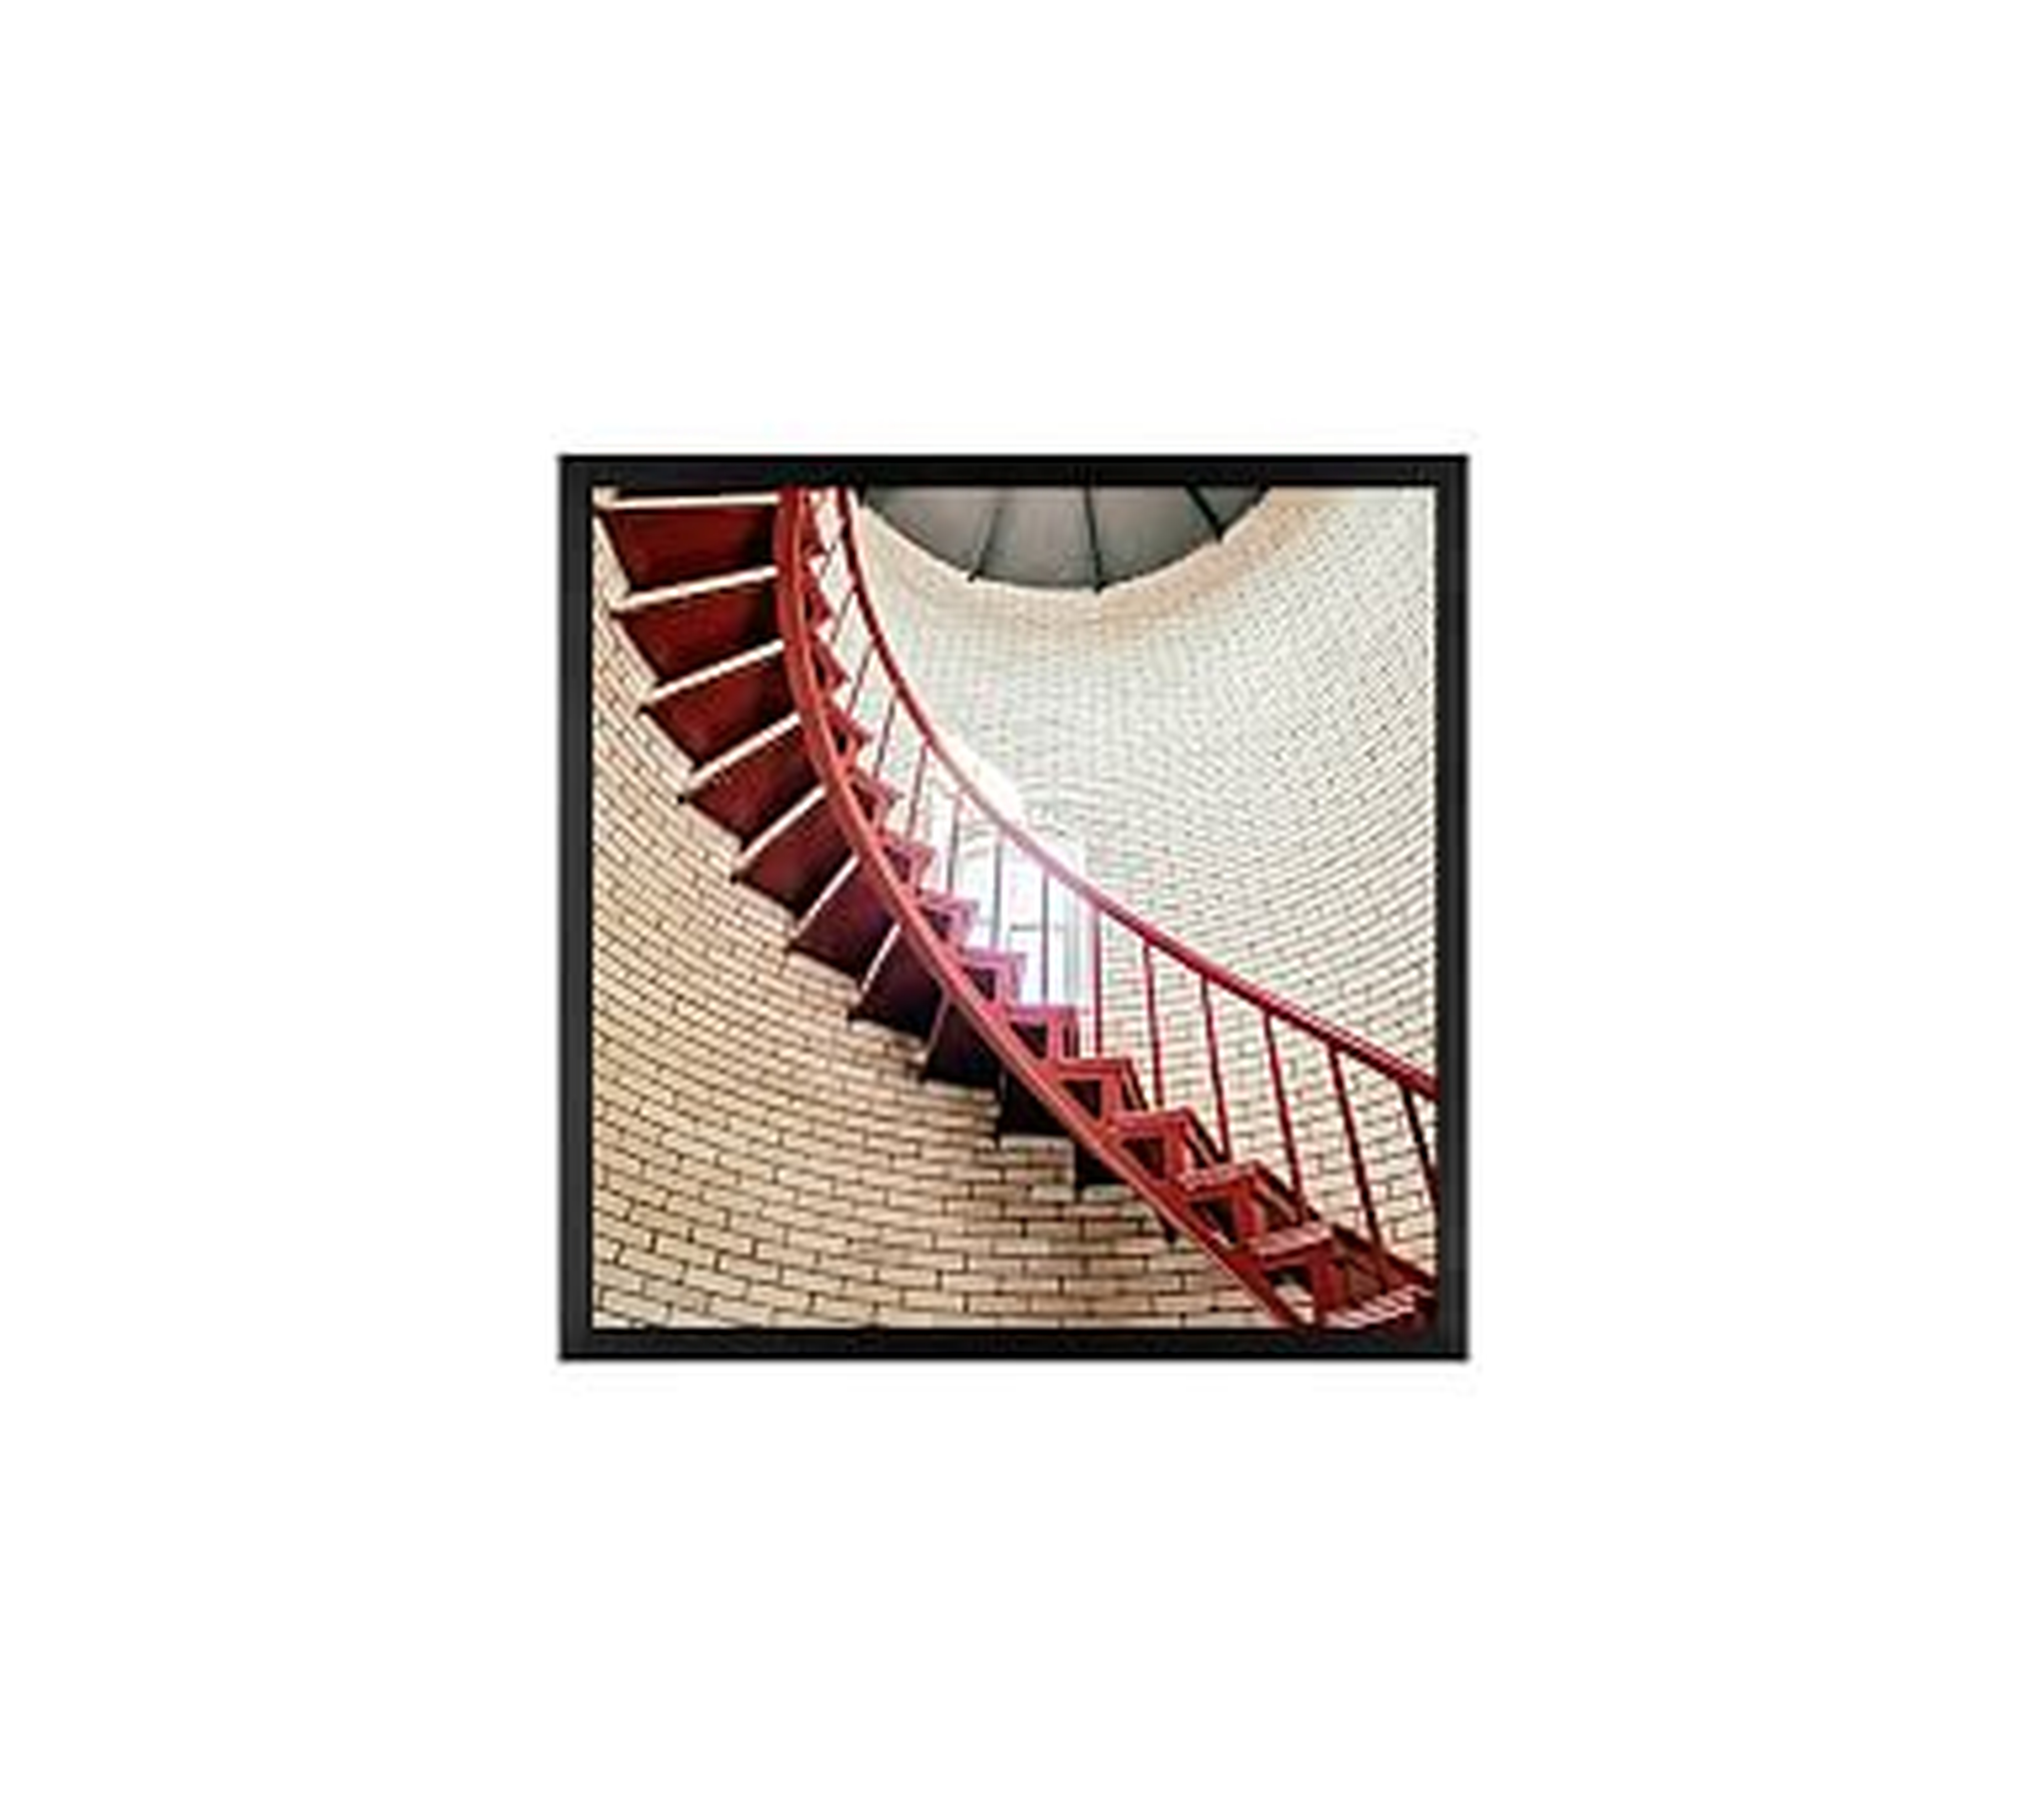 Lighthouse Stairs Framed Print by Cindy Taylor, 18x18", Wood Gallery Frame, Black, No Mat - Pottery Barn